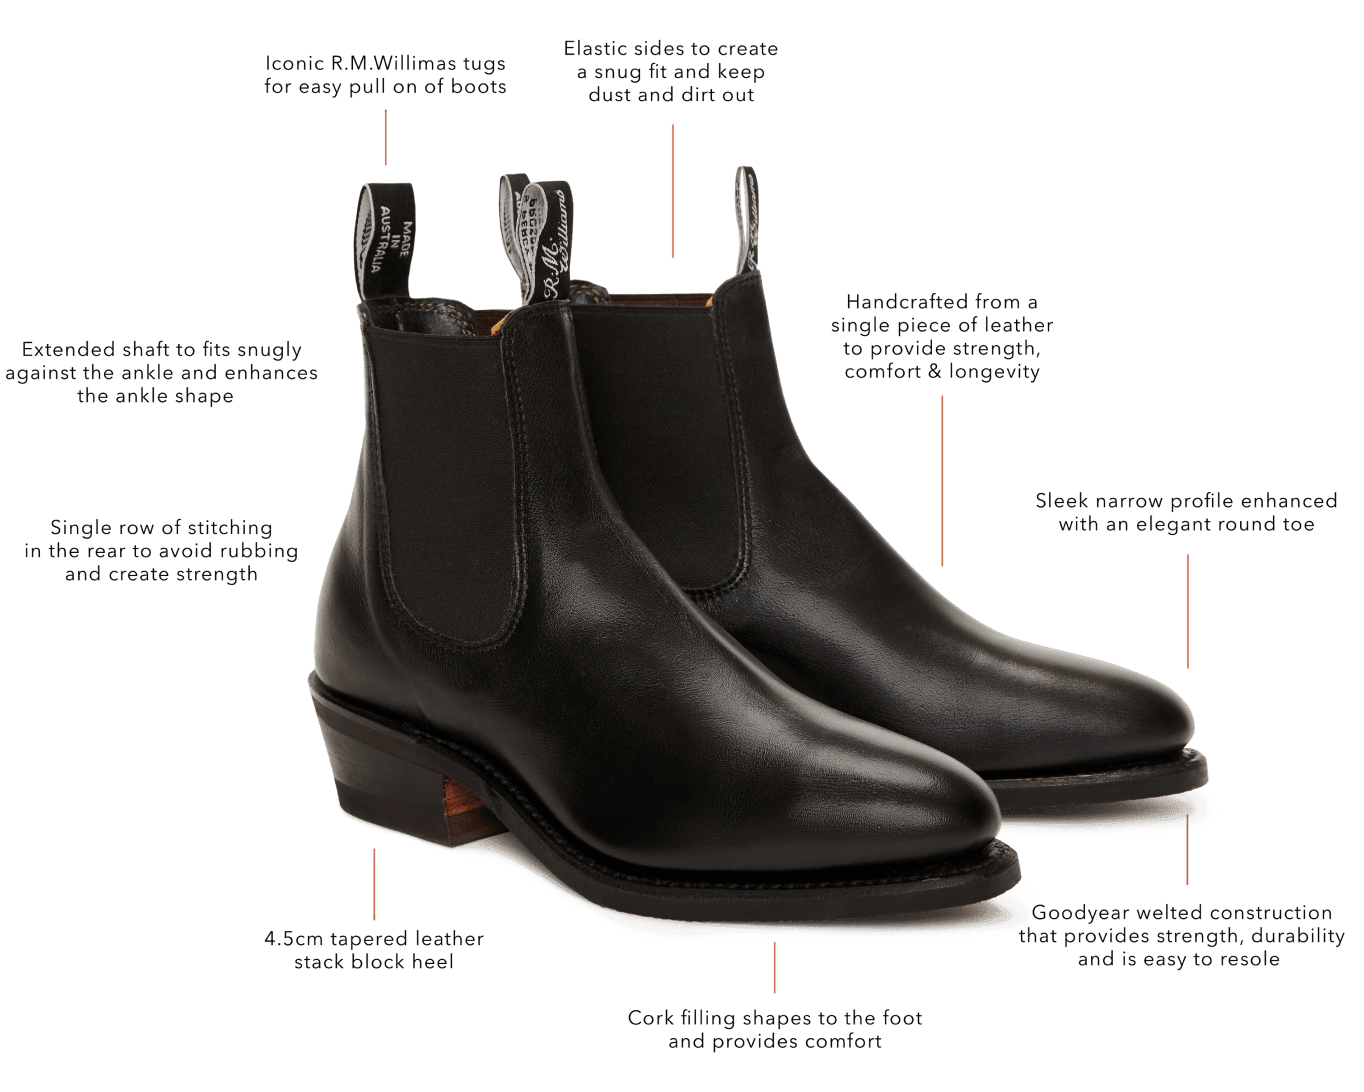 The Lady Yearling boot design story | R.M.Williams®